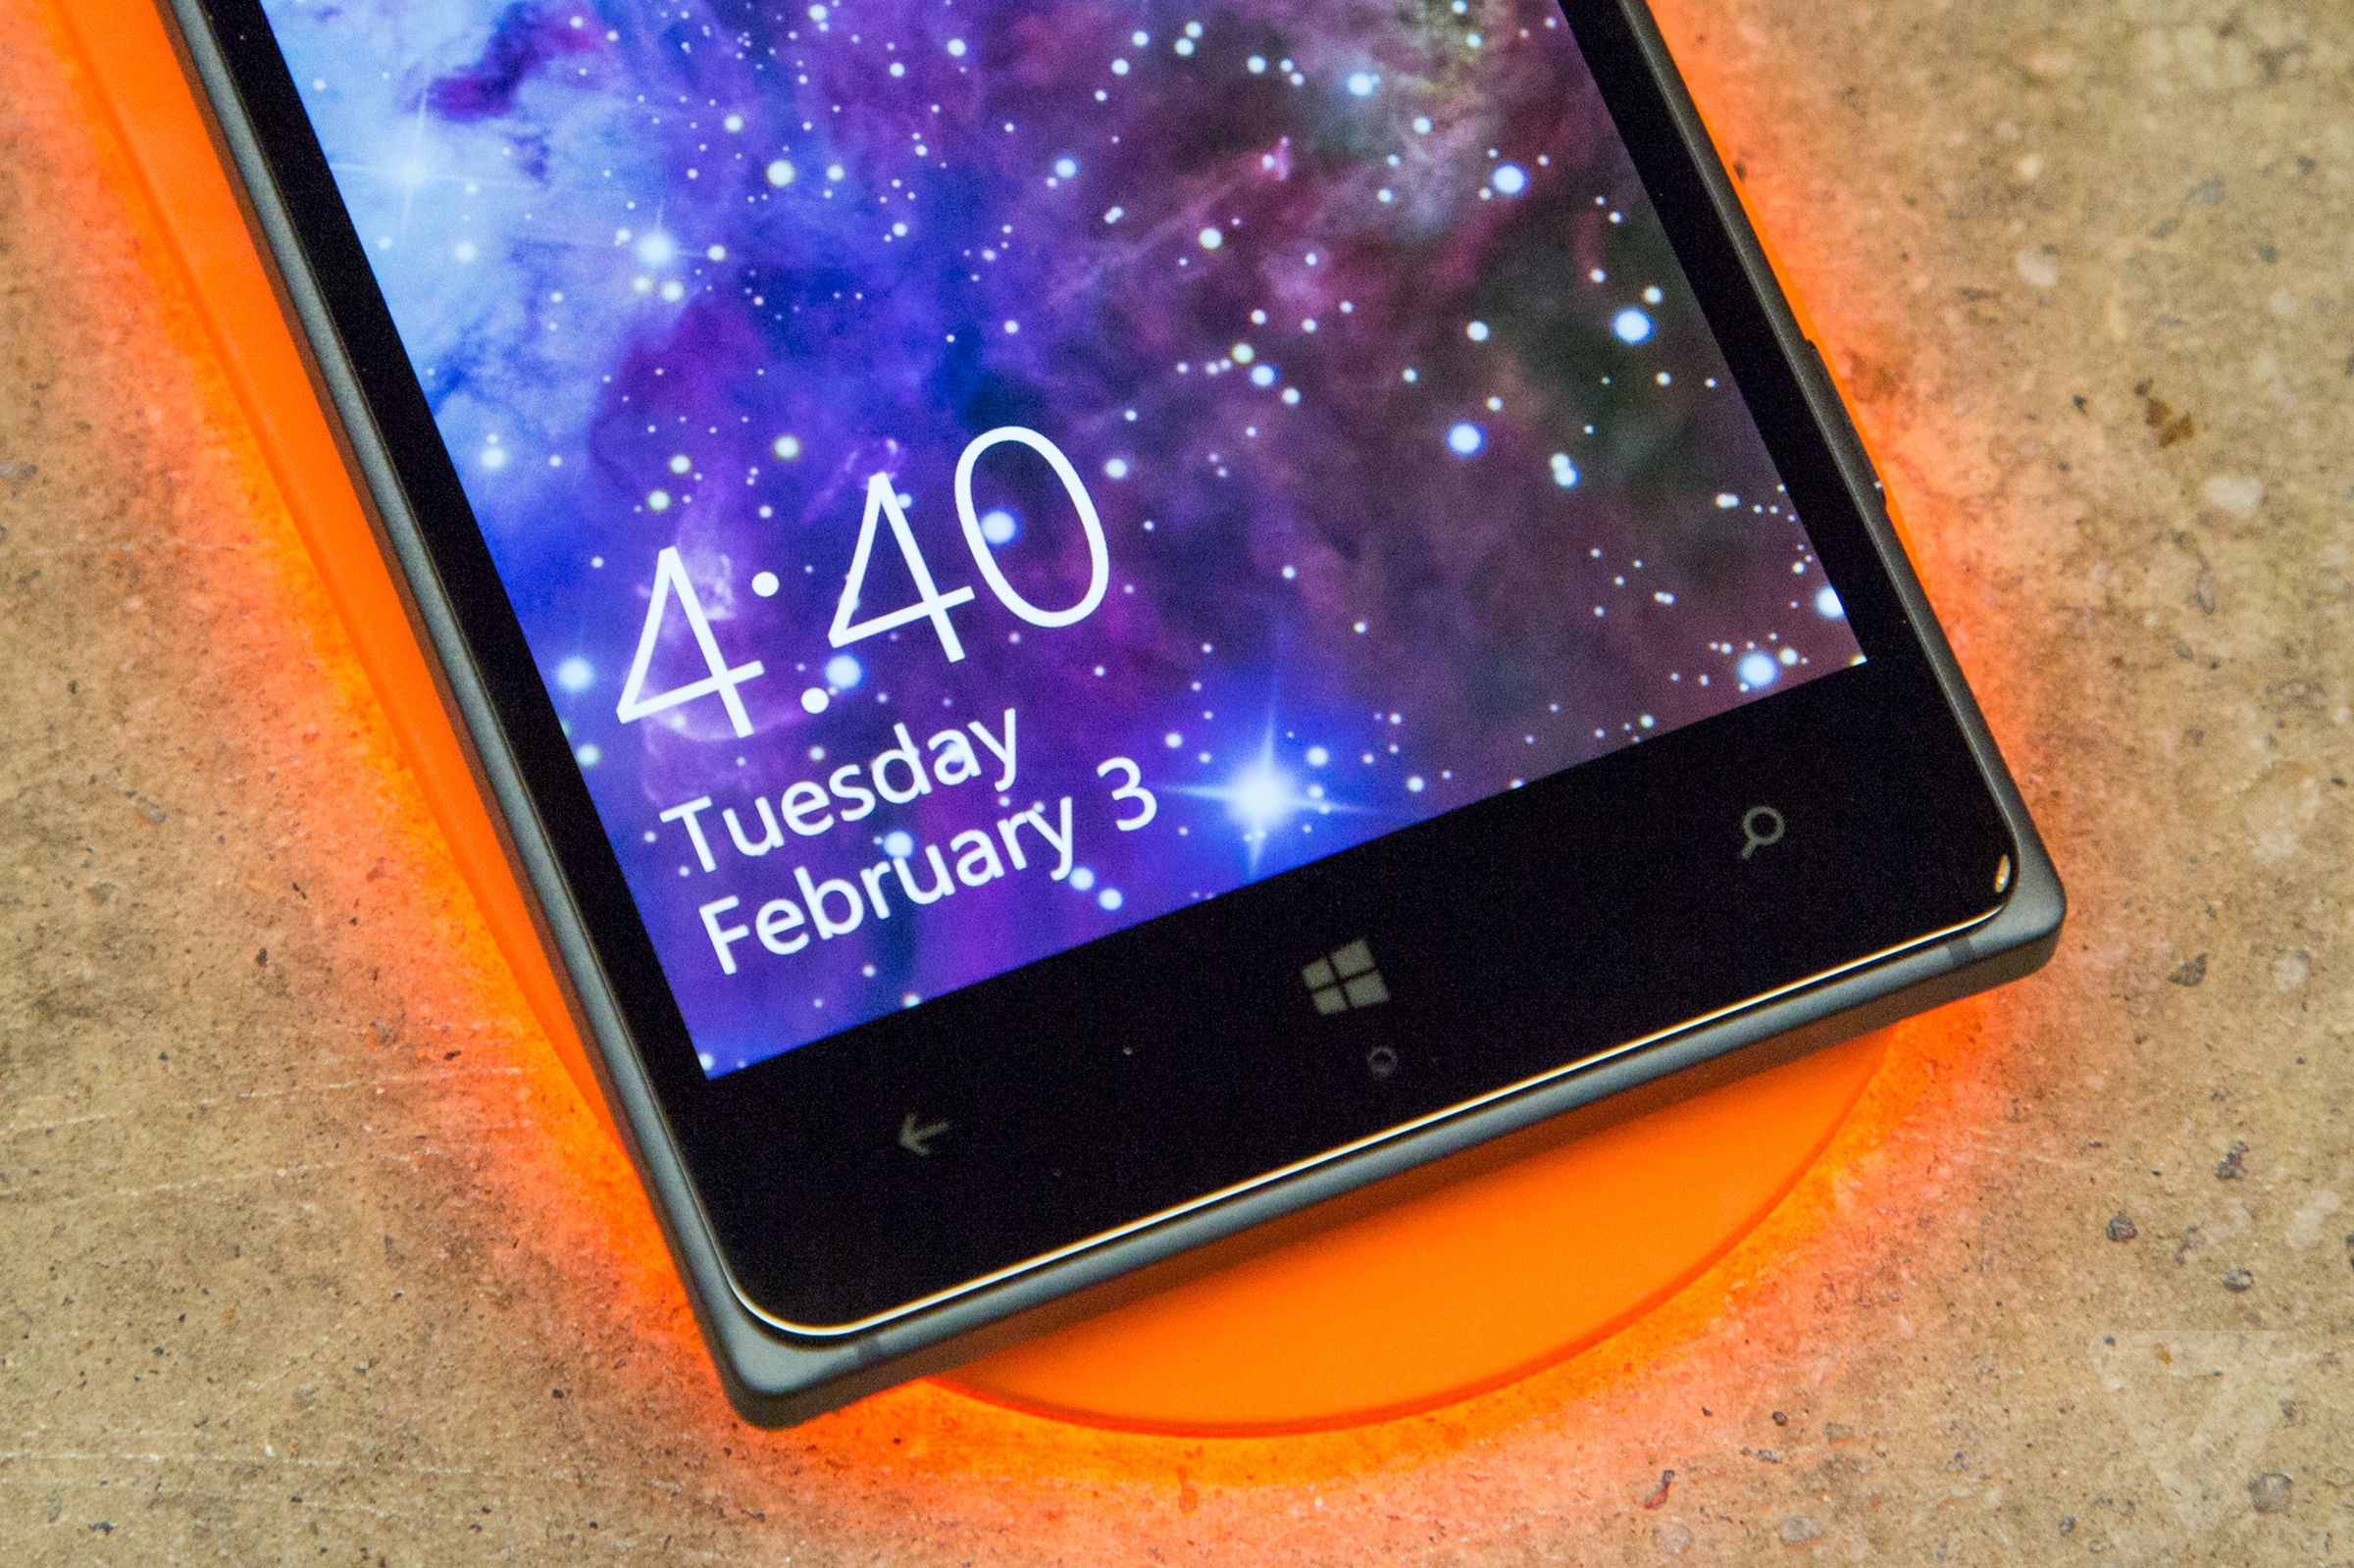 Nokia wireless charging plate hands-on photos